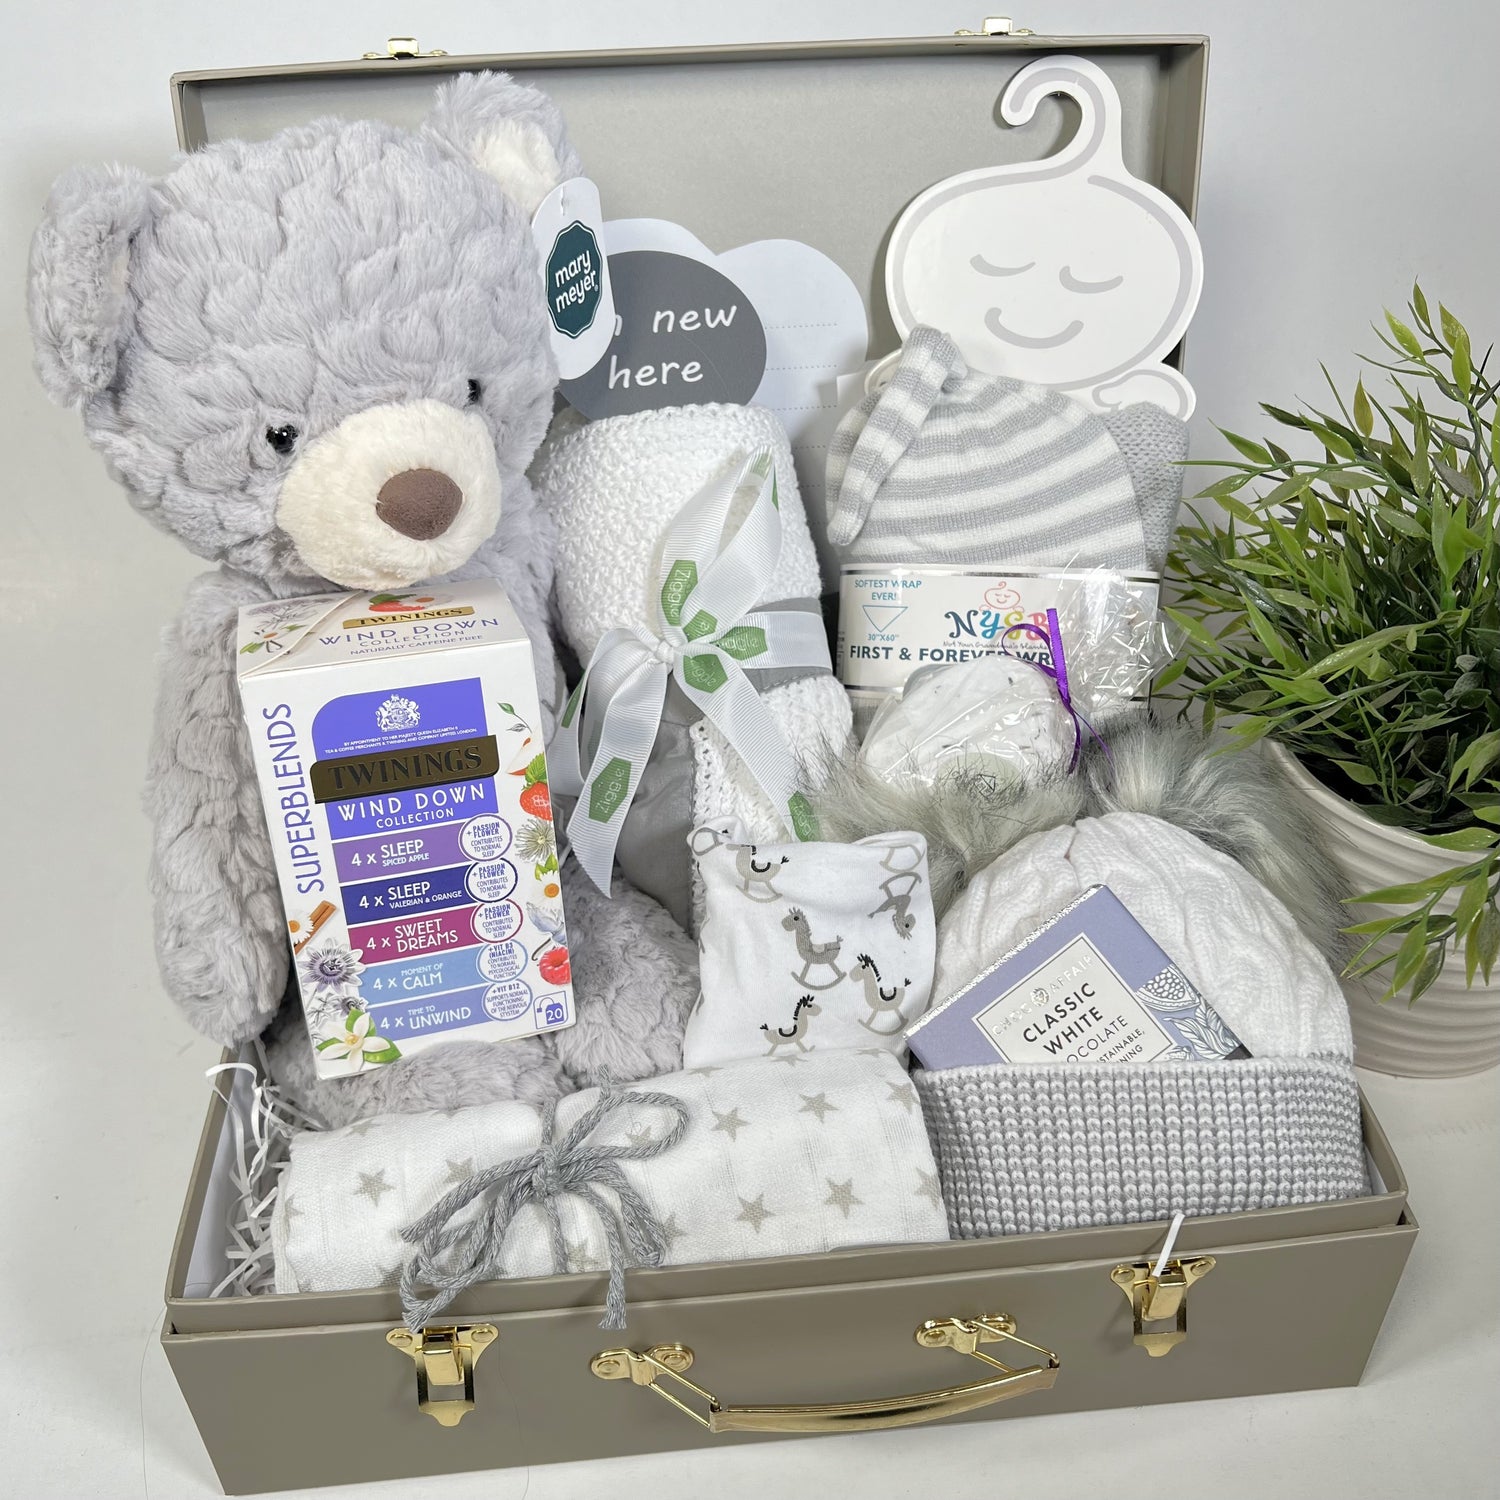 A neutral new baby gift in a khaki baby keepsake case containing 1 medium Mary Meyer shadow teddybear soft toy, a white cotton cellular baby blanket with a grey trim, 1 grey swaddle blanket and matching baby knot hat,a large musling, a cotton dribble bib, a grey and white baby pompom hat, a natural lavender bather bomb, a packet of Twining calming and sleep teabags and a bar of Choc Affair white chocolate.